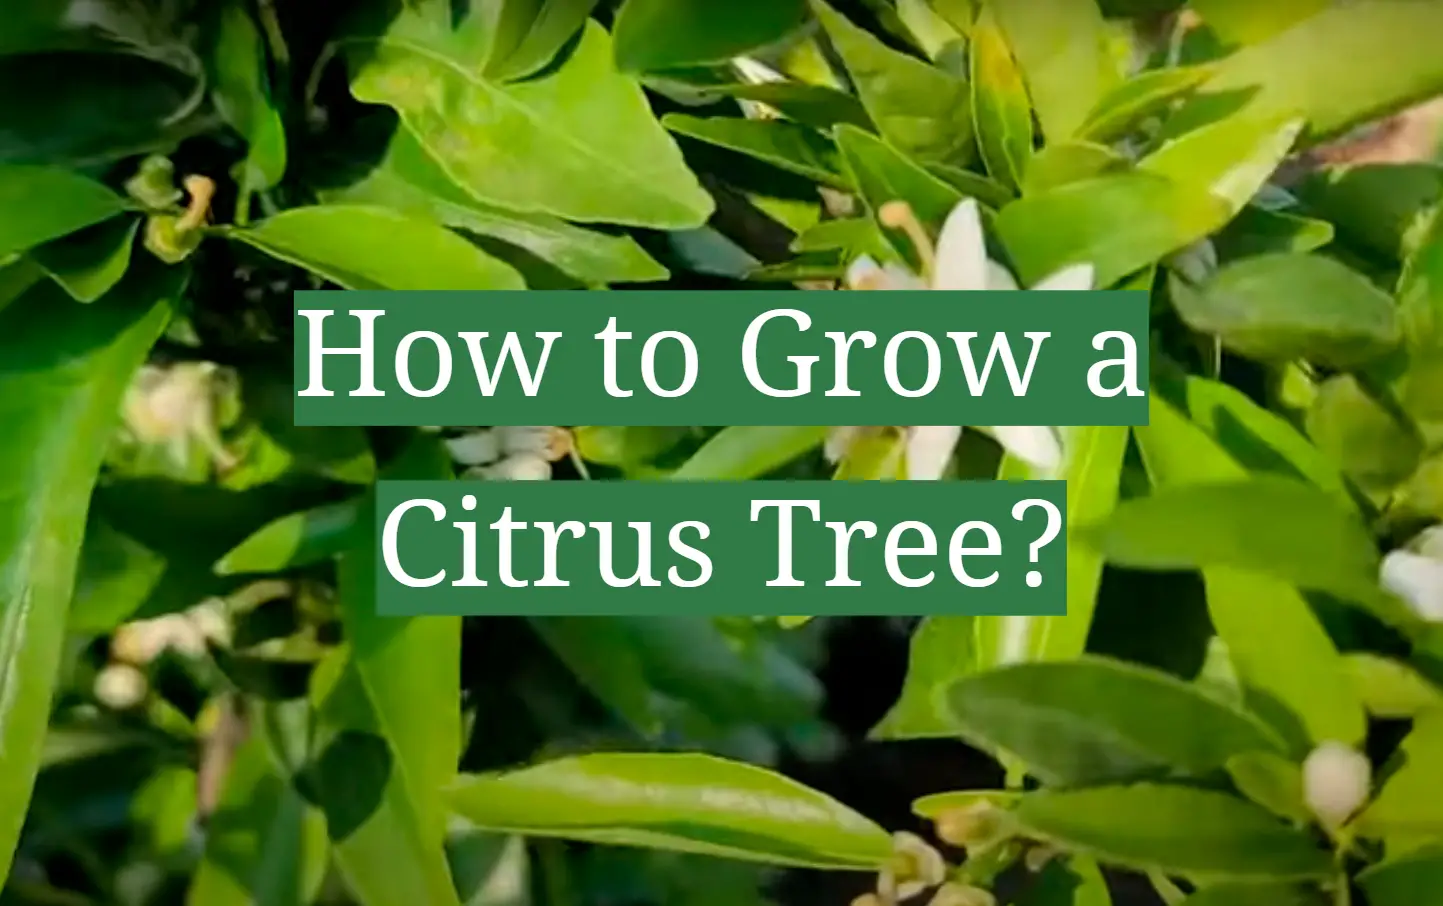 How to Grow a Citrus Tree?